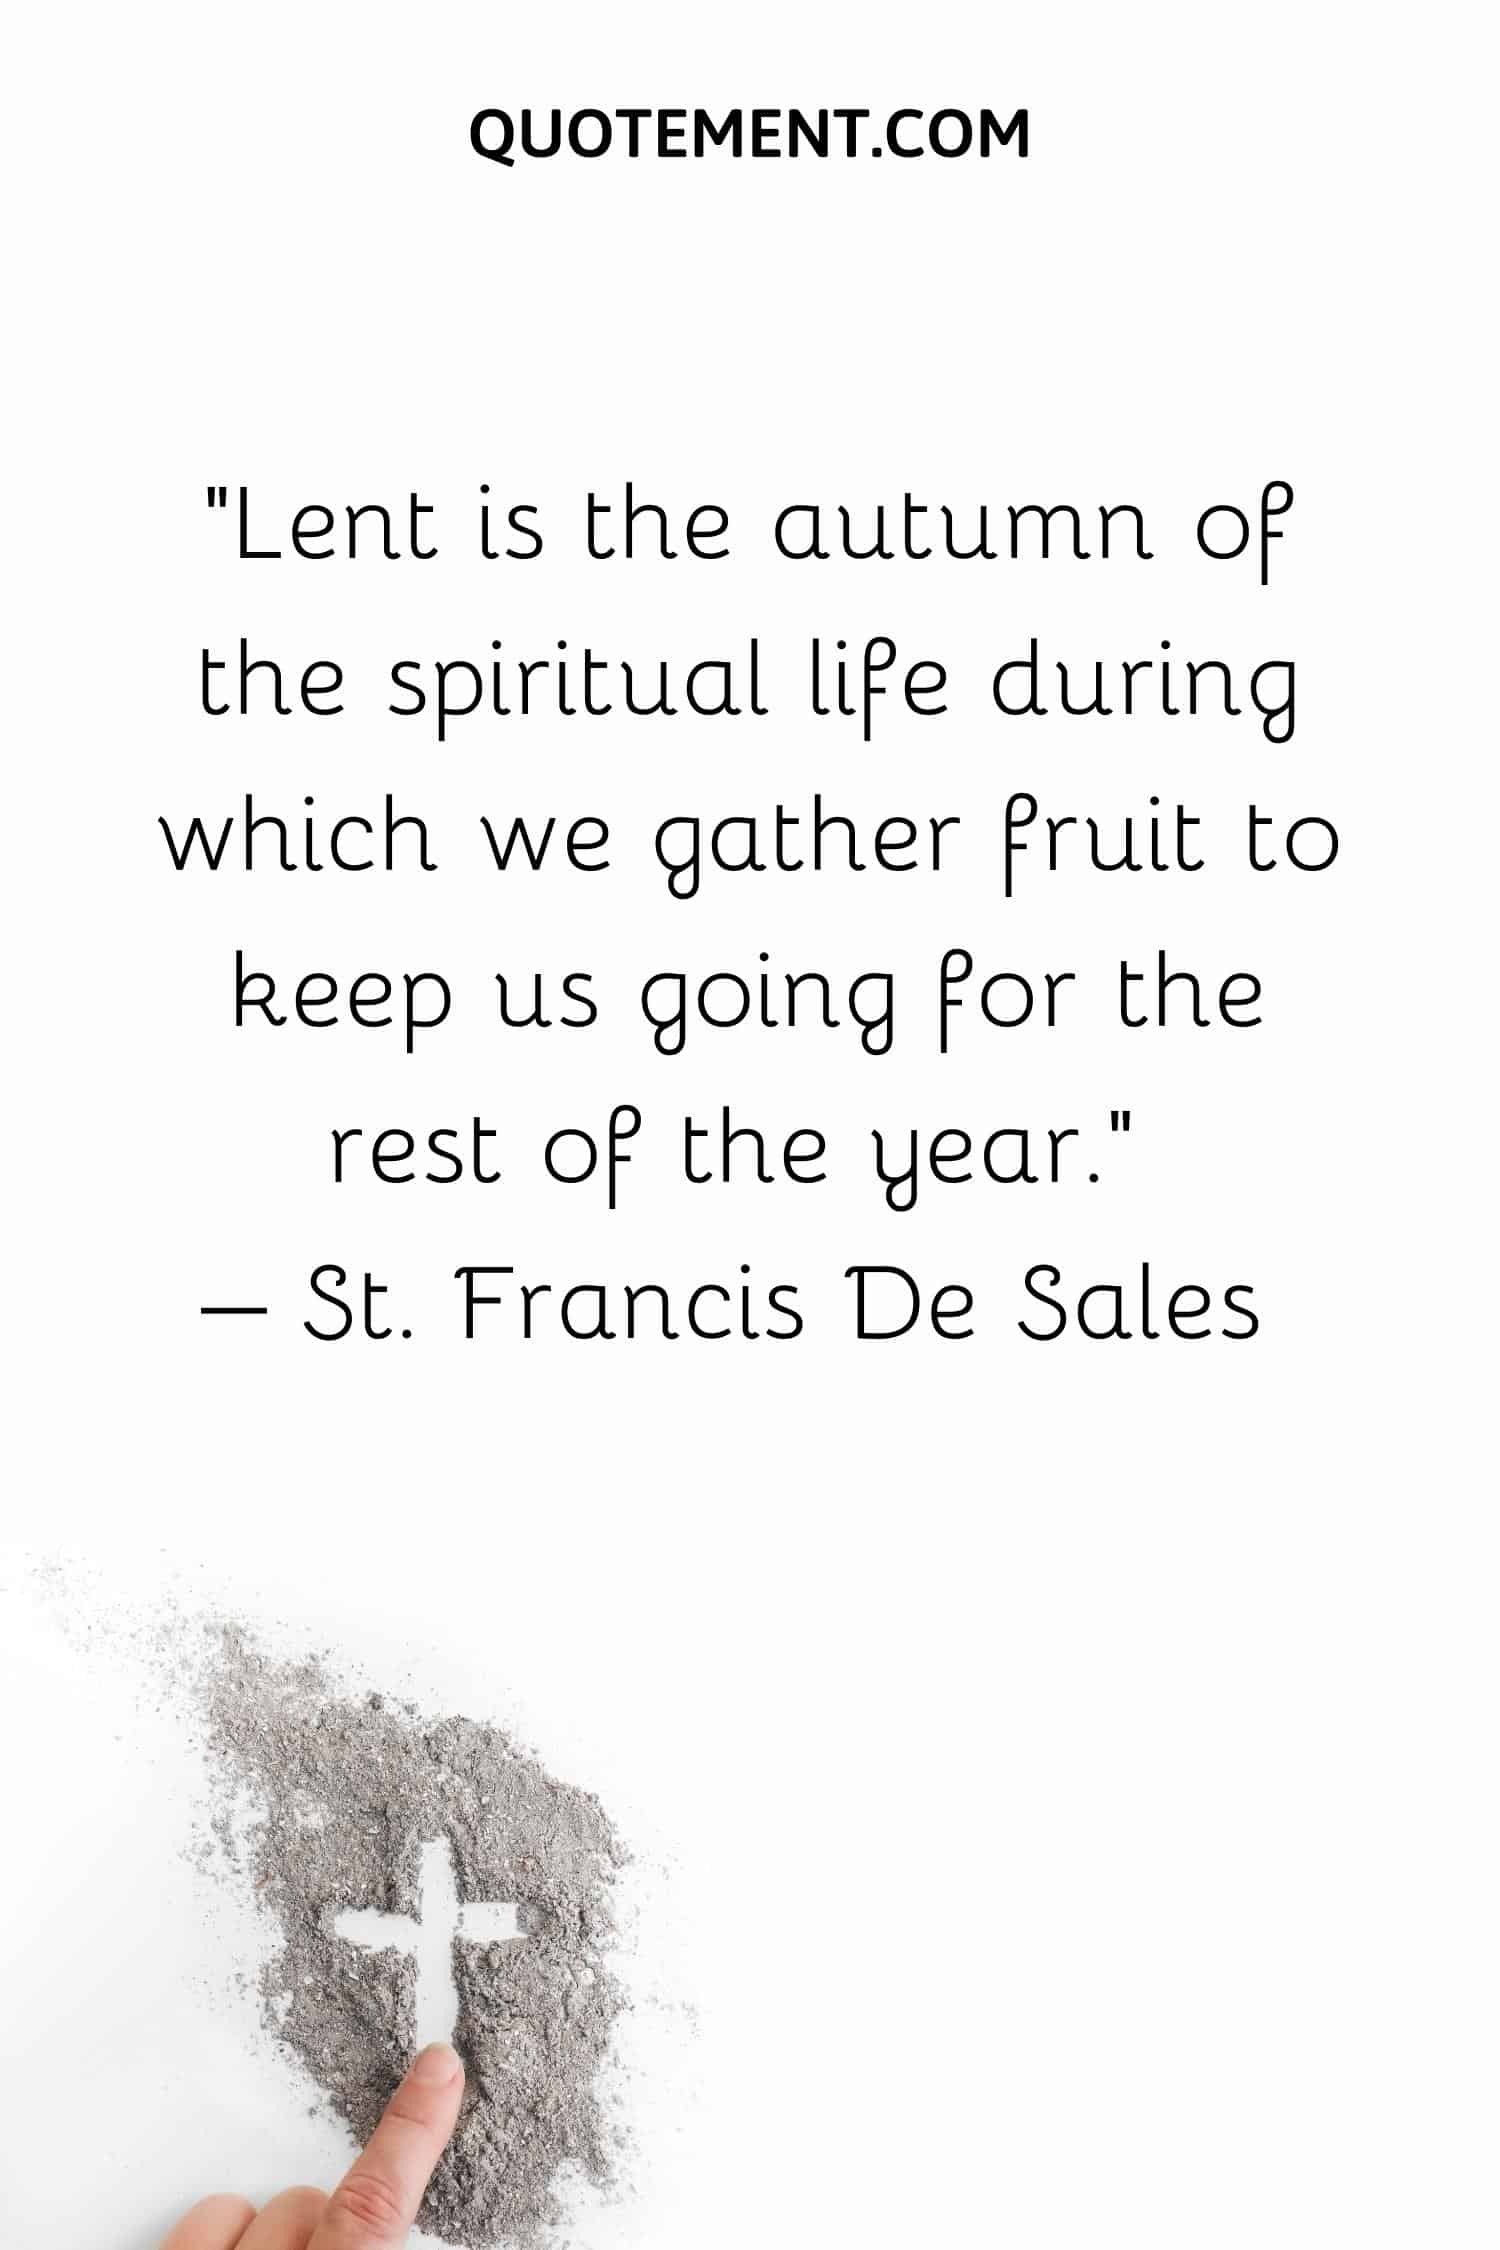 Lent is the autumn of the spiritual life during which we gather fruit to keep us going for the rest of the year.